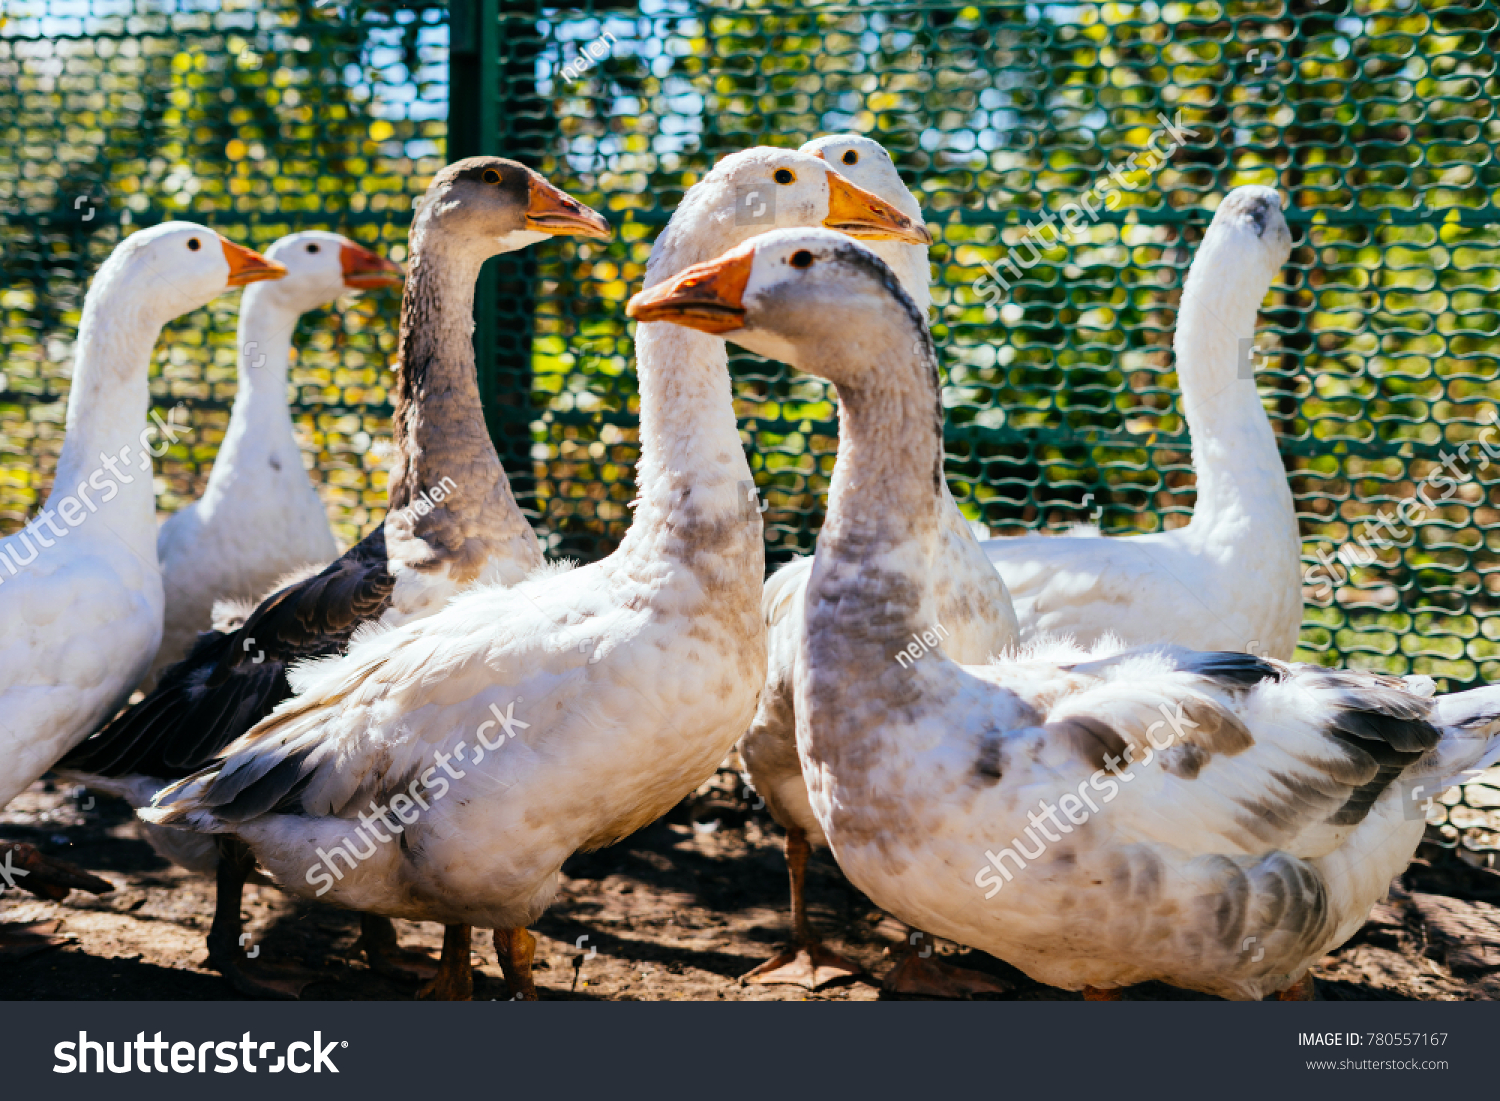 a lot of white and gray geese, sun and greens #780557167